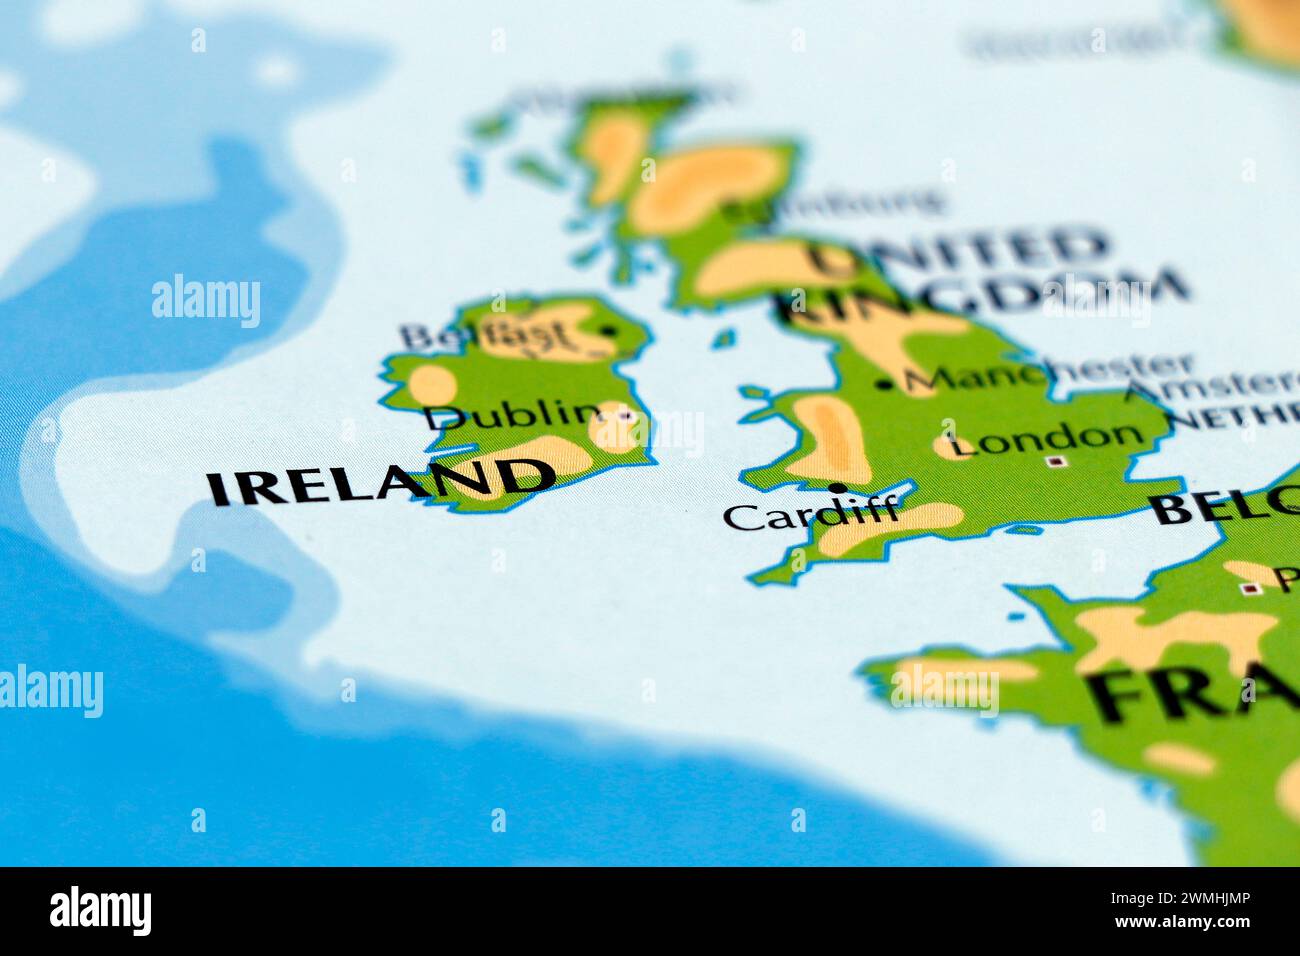 world map of europe, ireland bordering country in close up Stock Photo